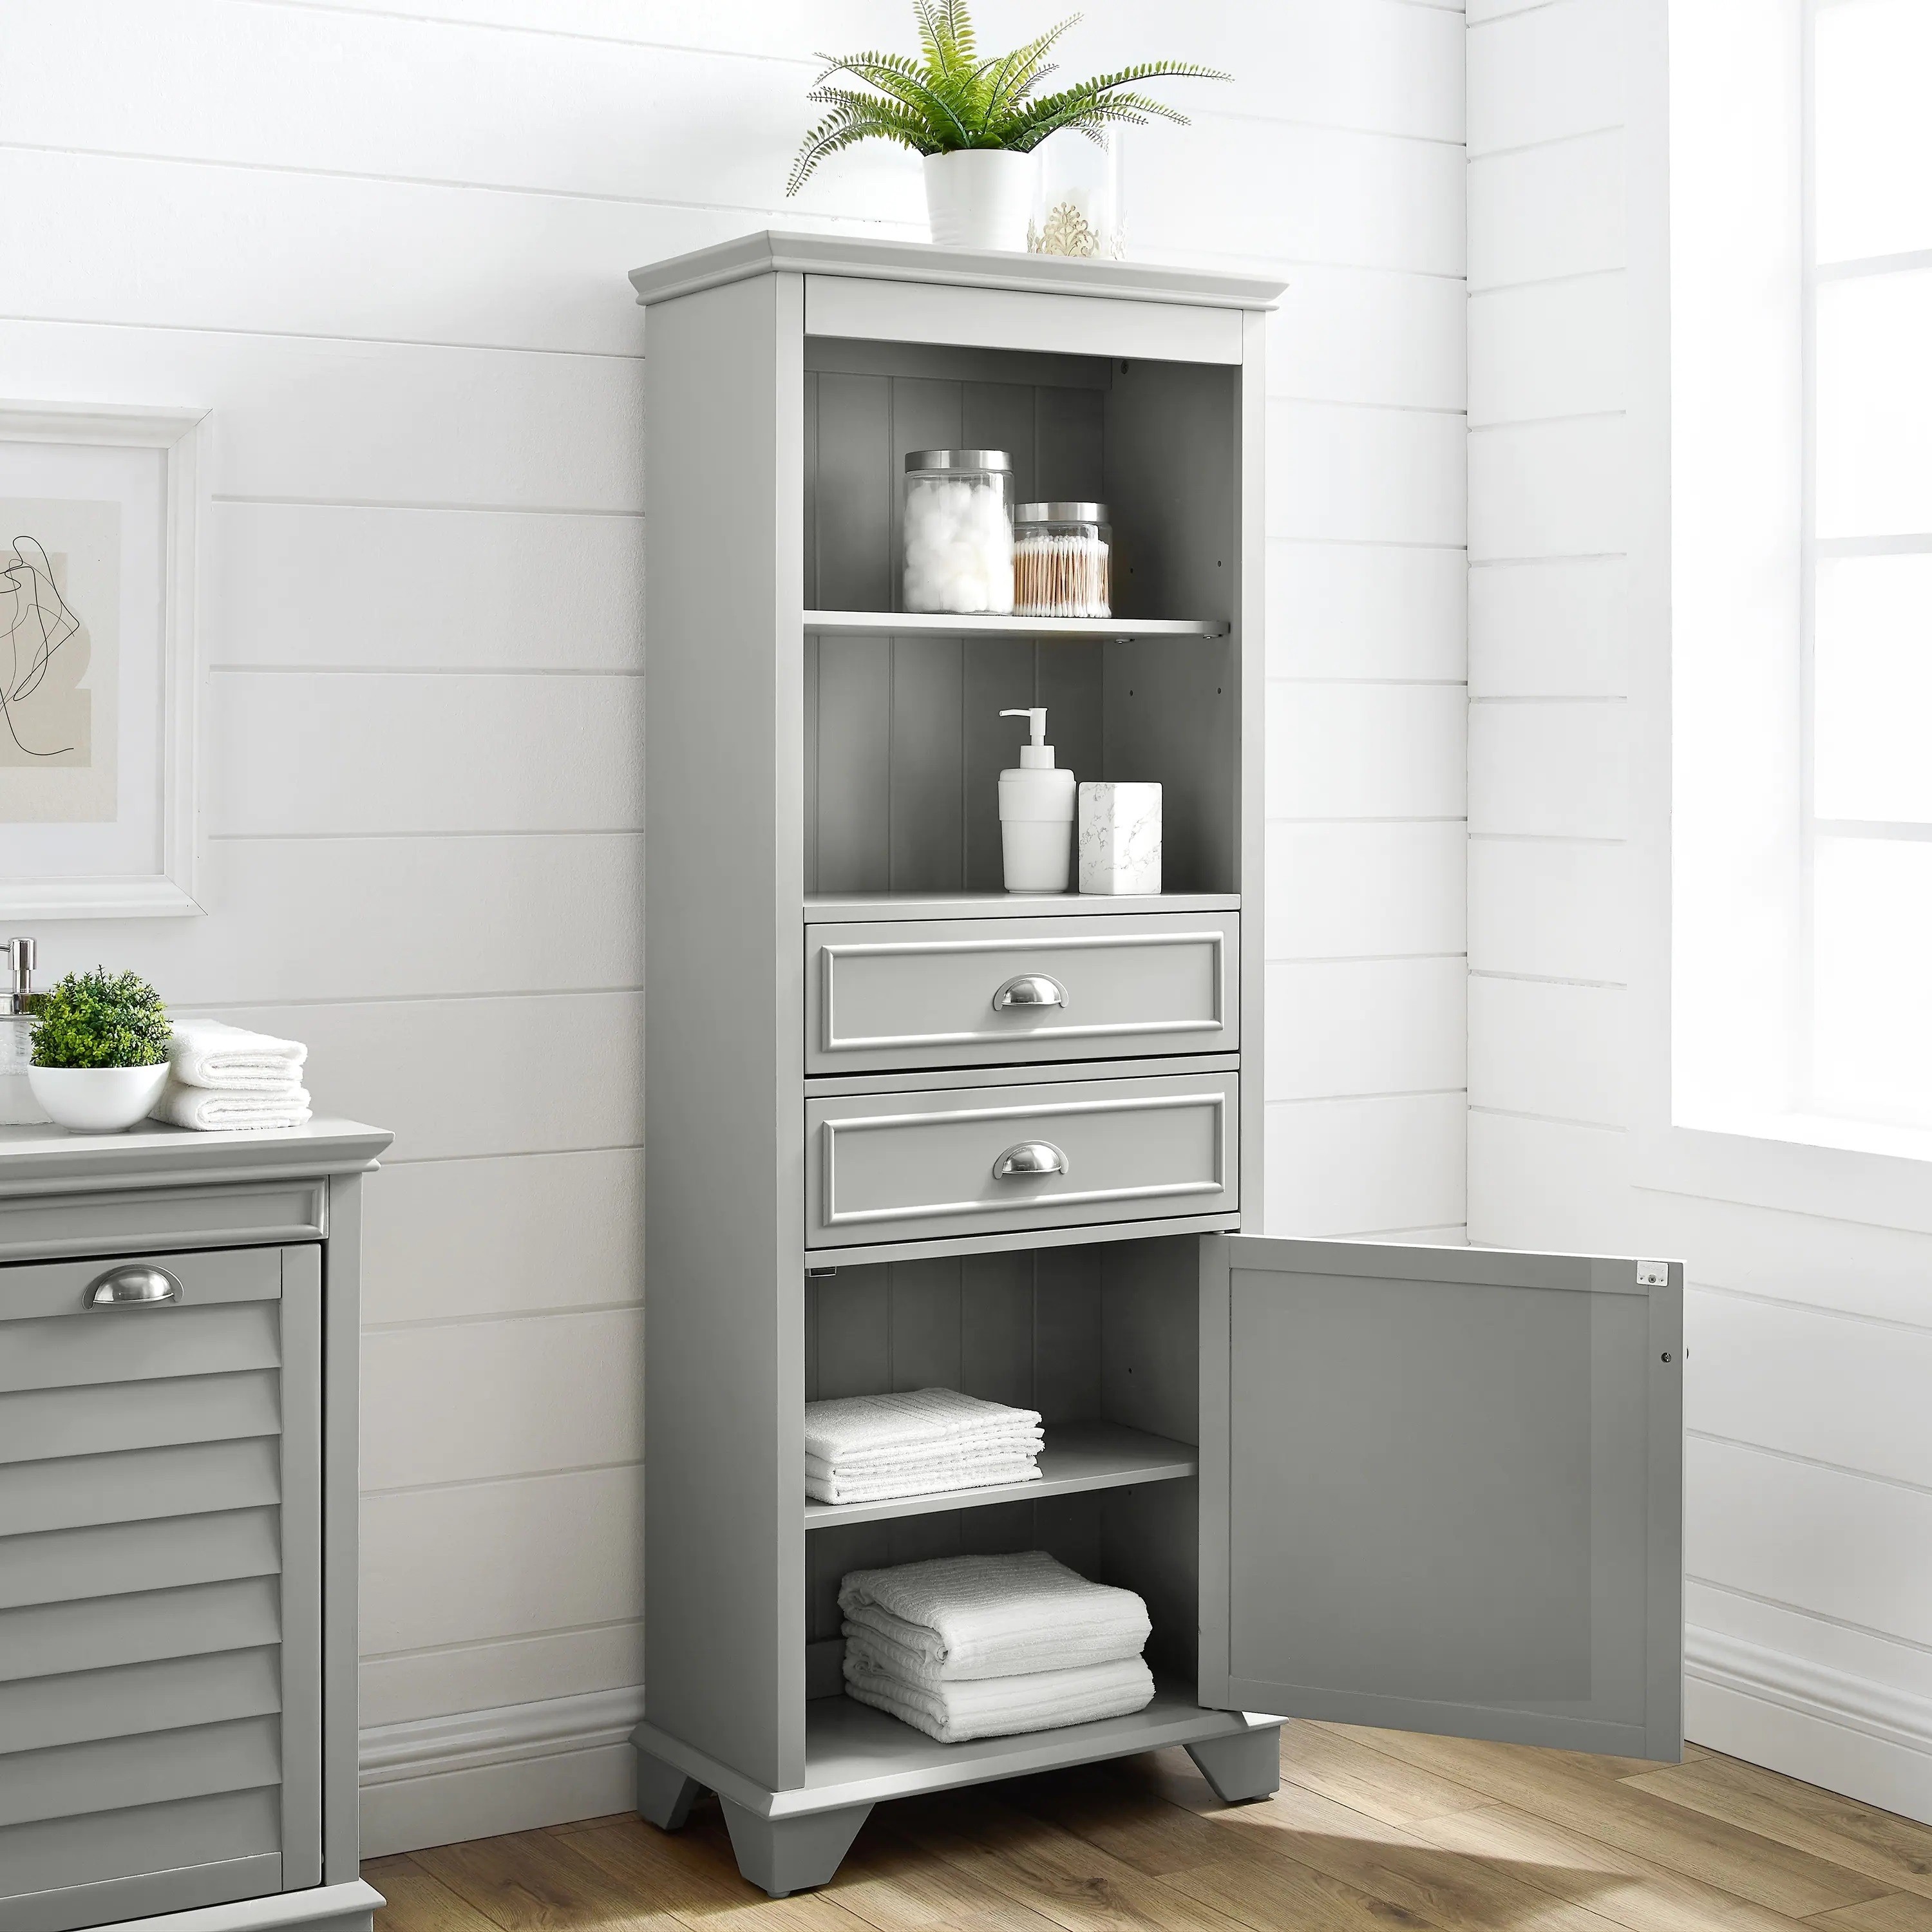 Wider linen tower for bathrooms where space isn’t a problem